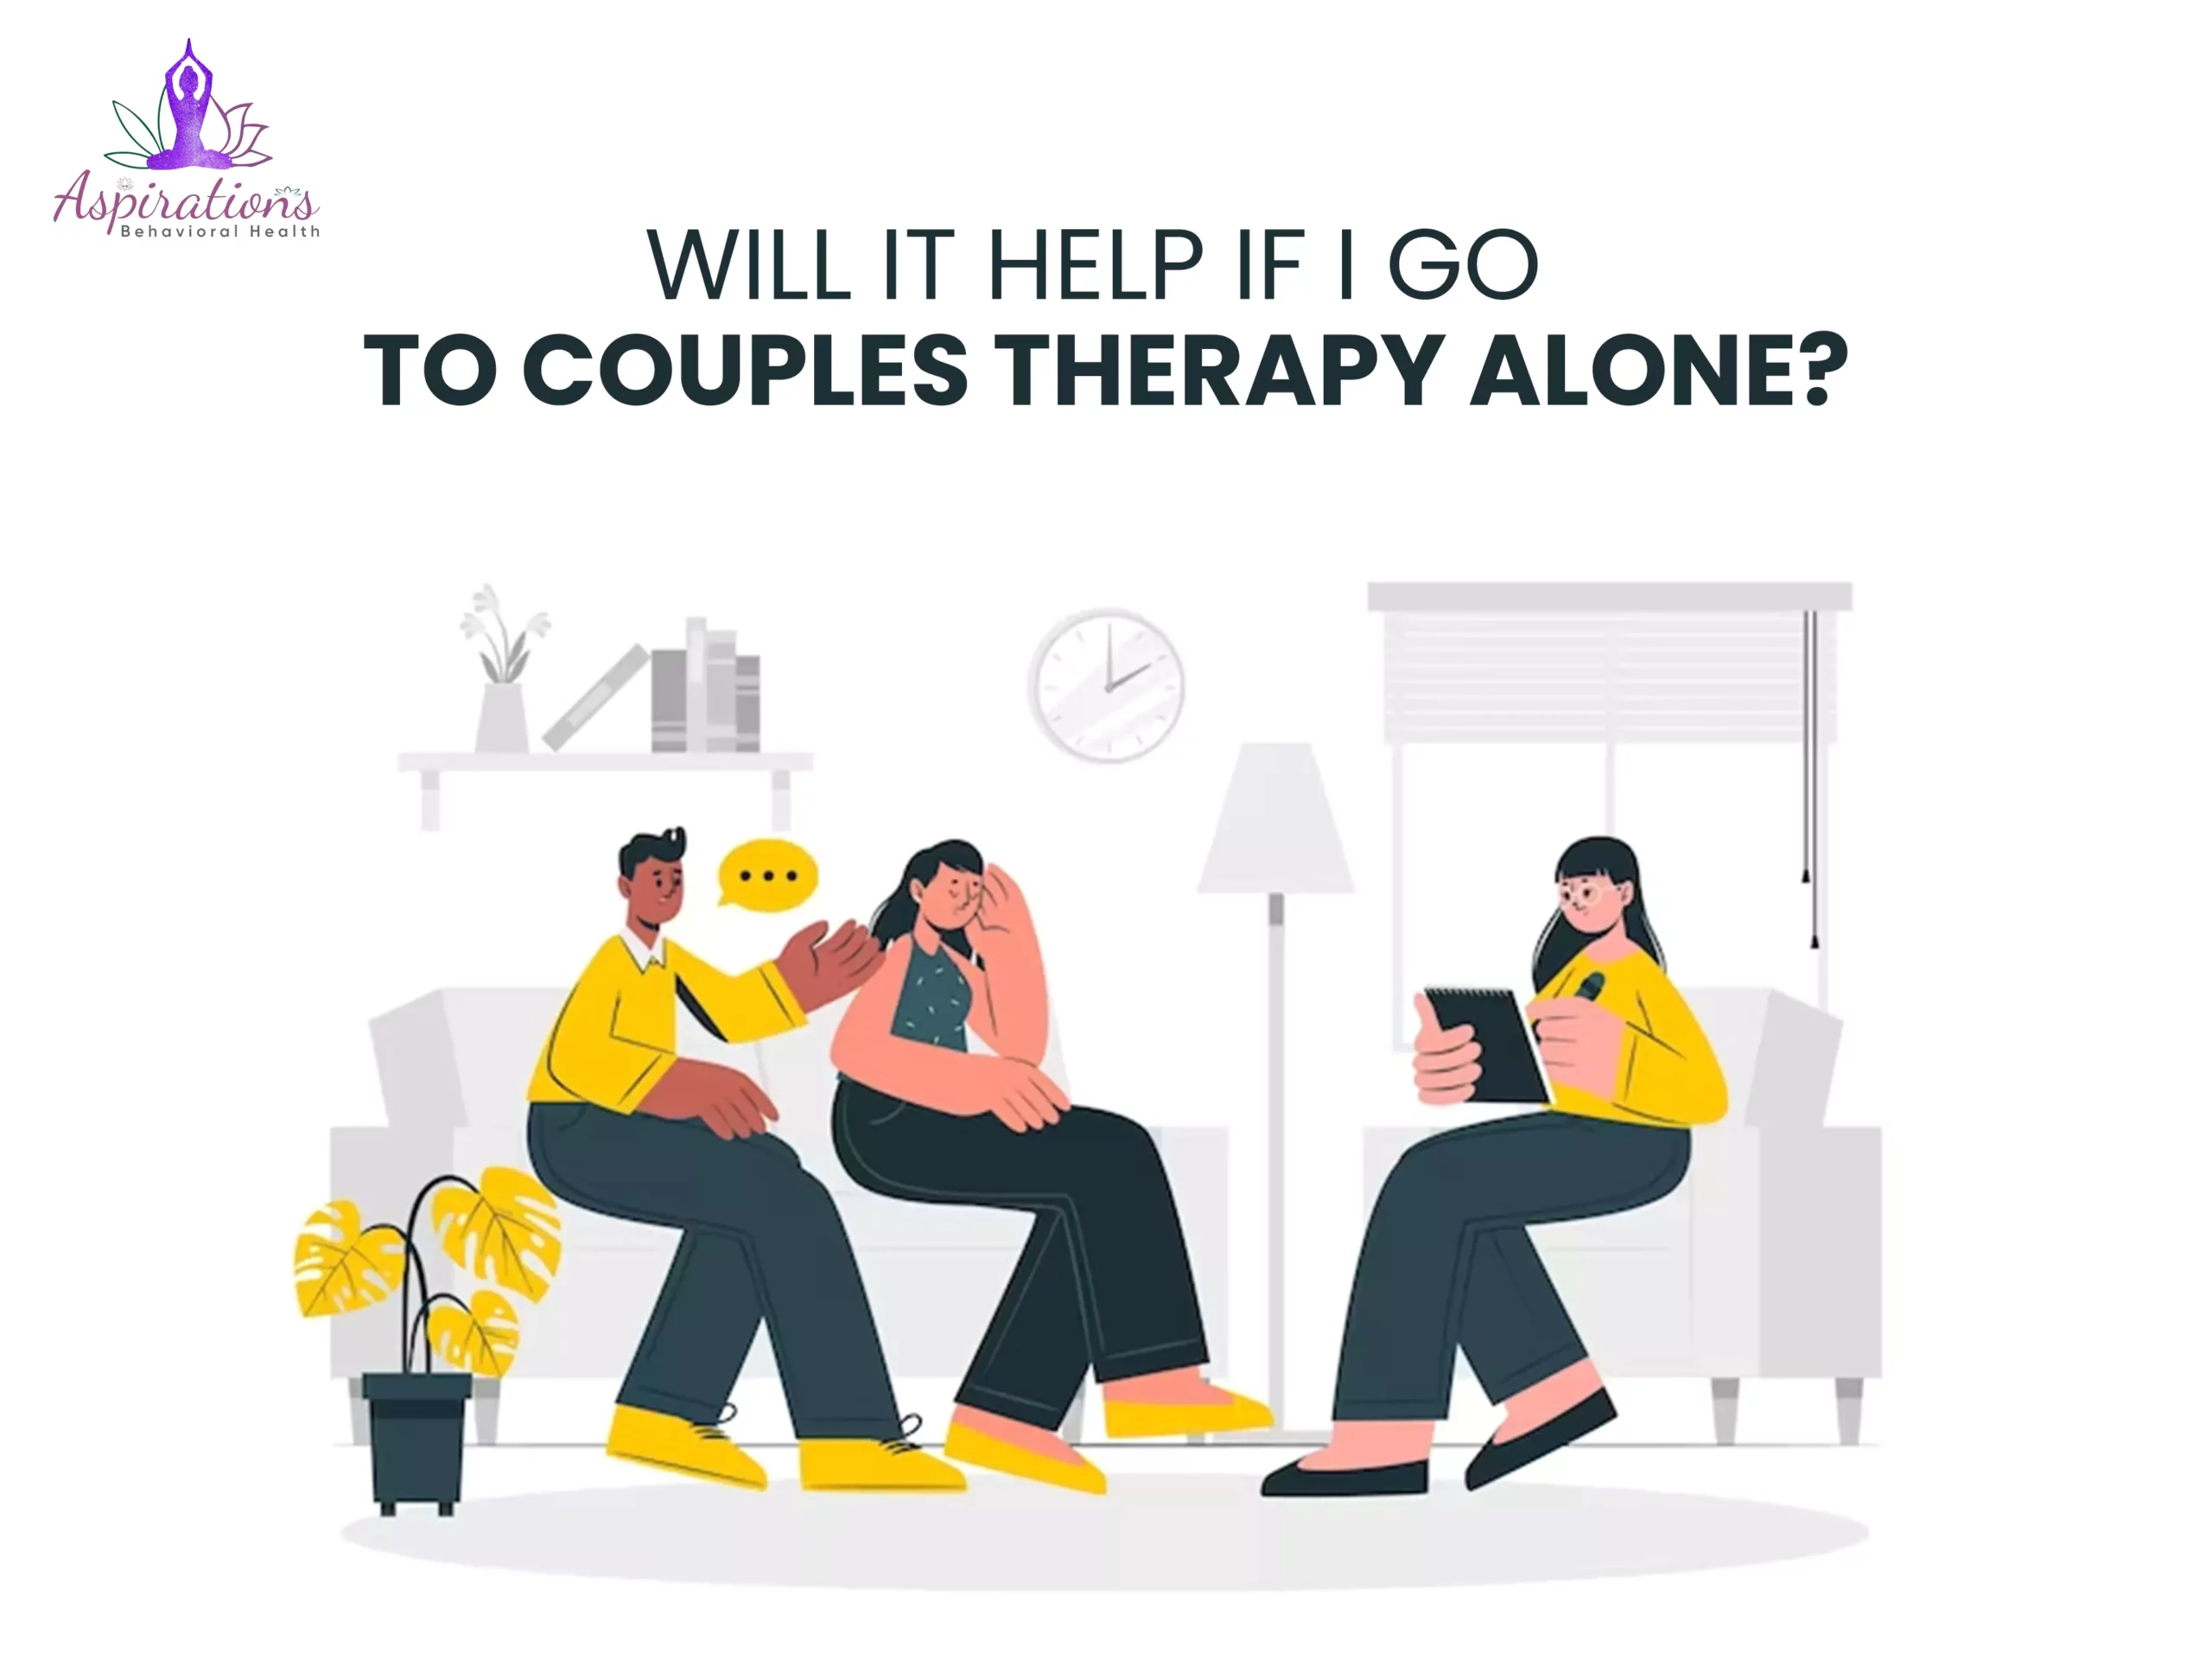 Will It Help If I Go To Couples Therapy Alone?